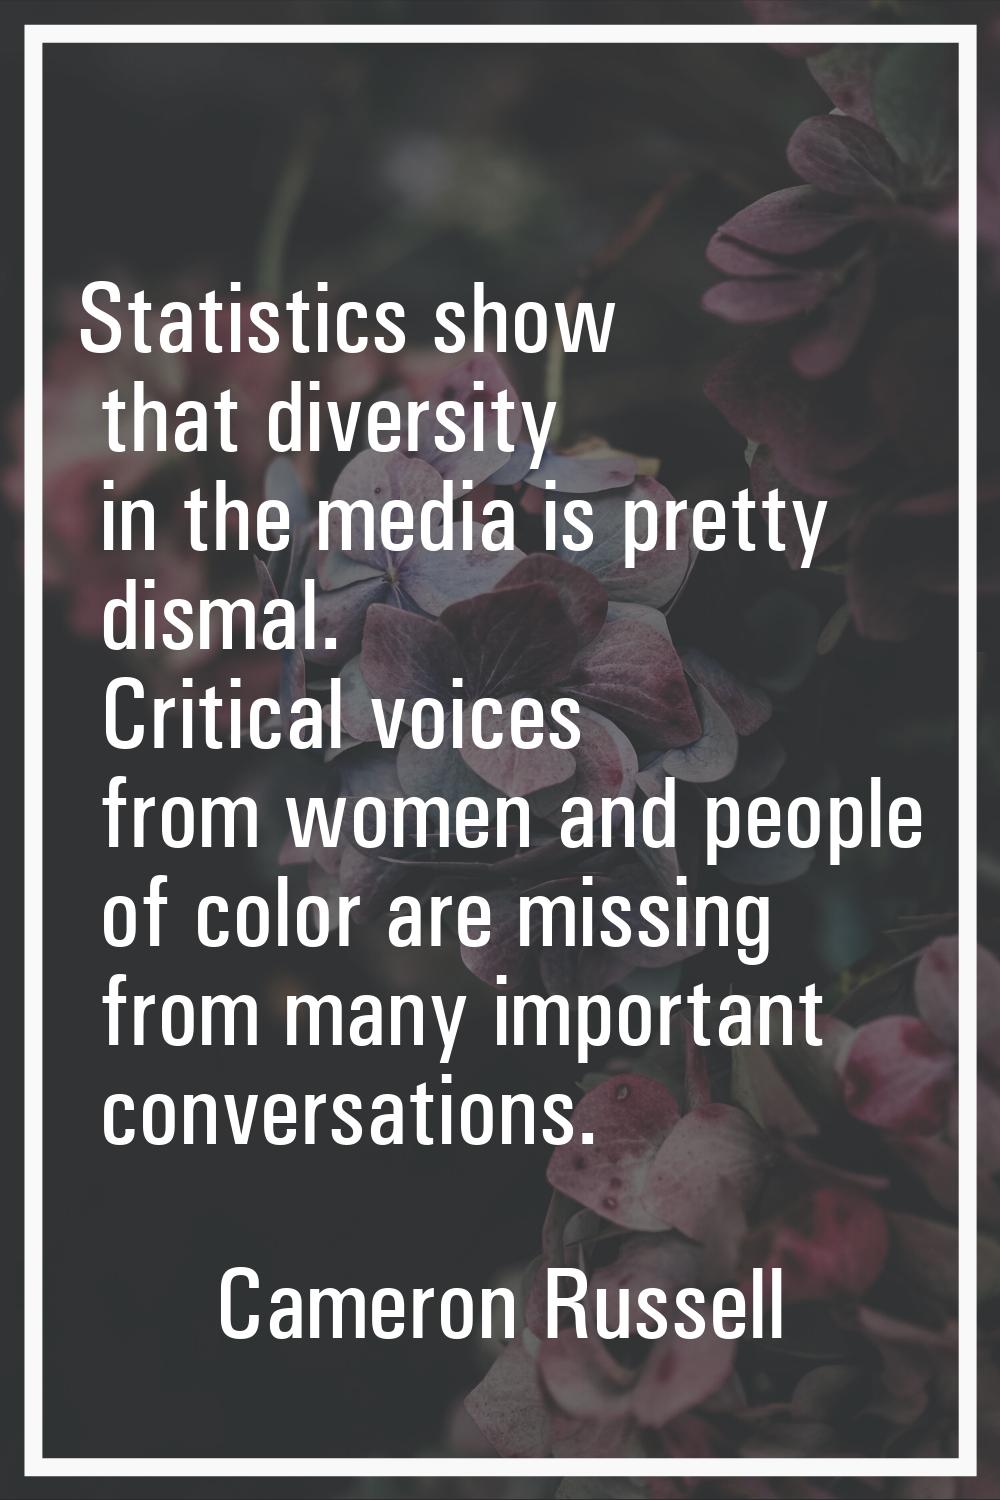 Statistics show that diversity in the media is pretty dismal. Critical voices from women and people